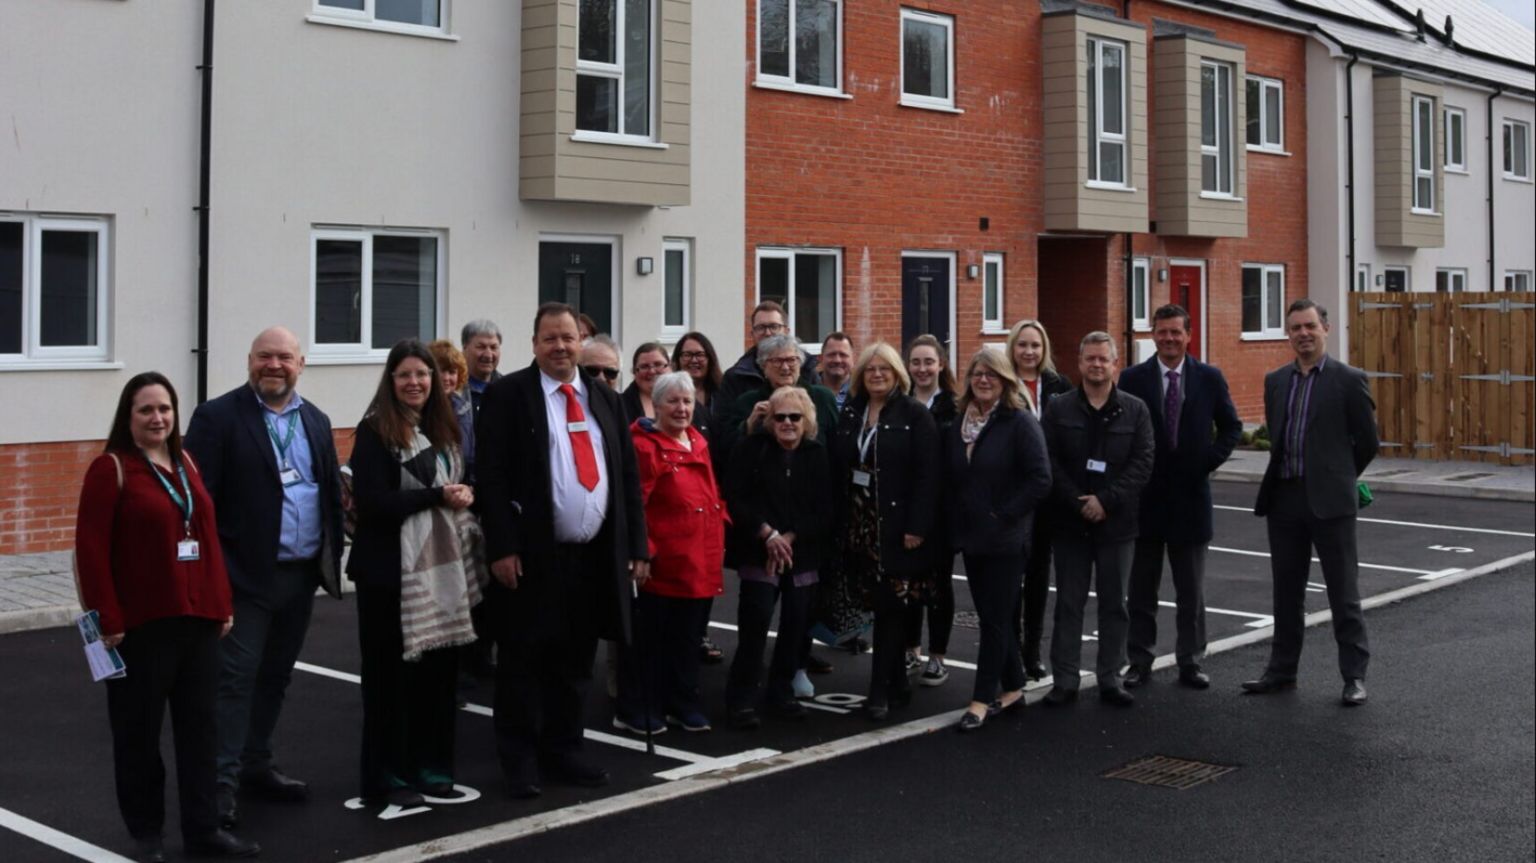 Low-cost homes built on former printworks site